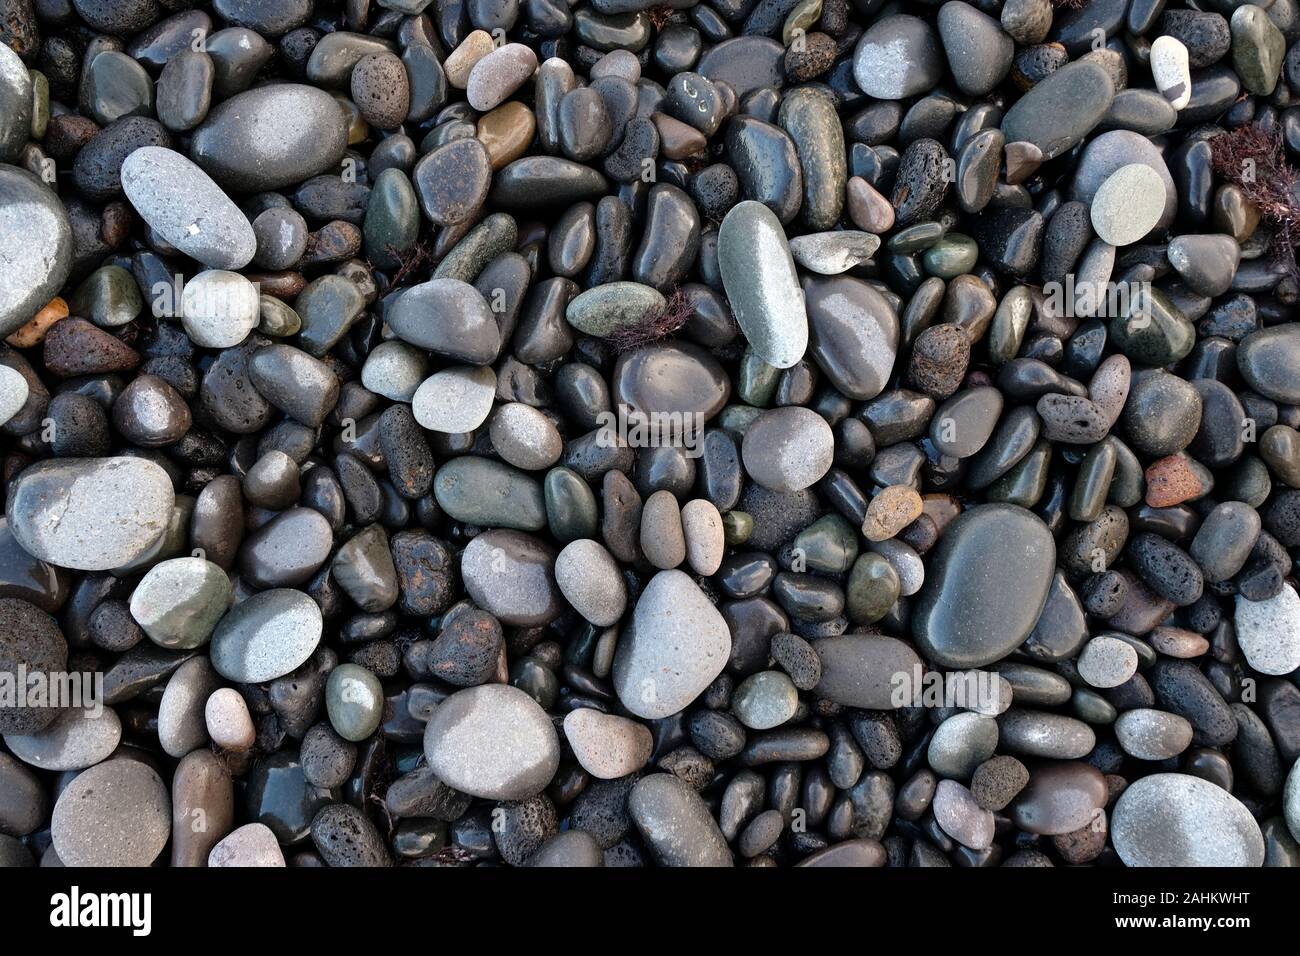 A selection of wet and dry round stones, pebbles on the beach. Stock Photo